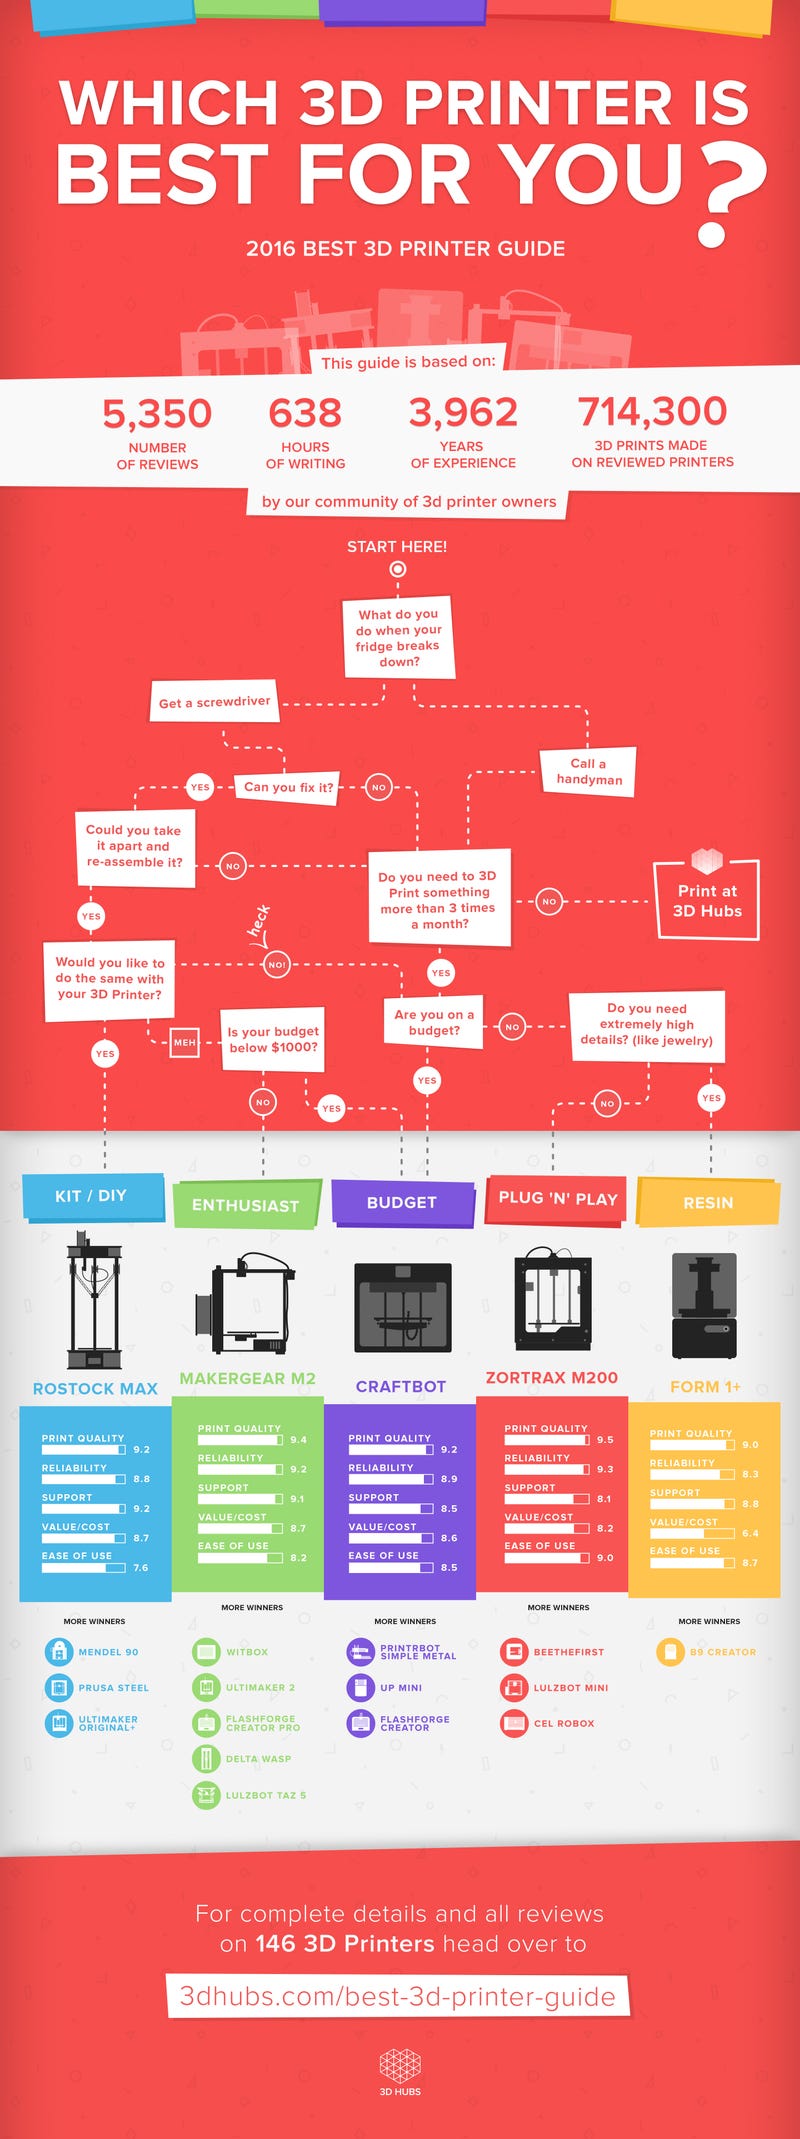 This Graphic Guides You to the Perfect 3D Printer for Your Needs